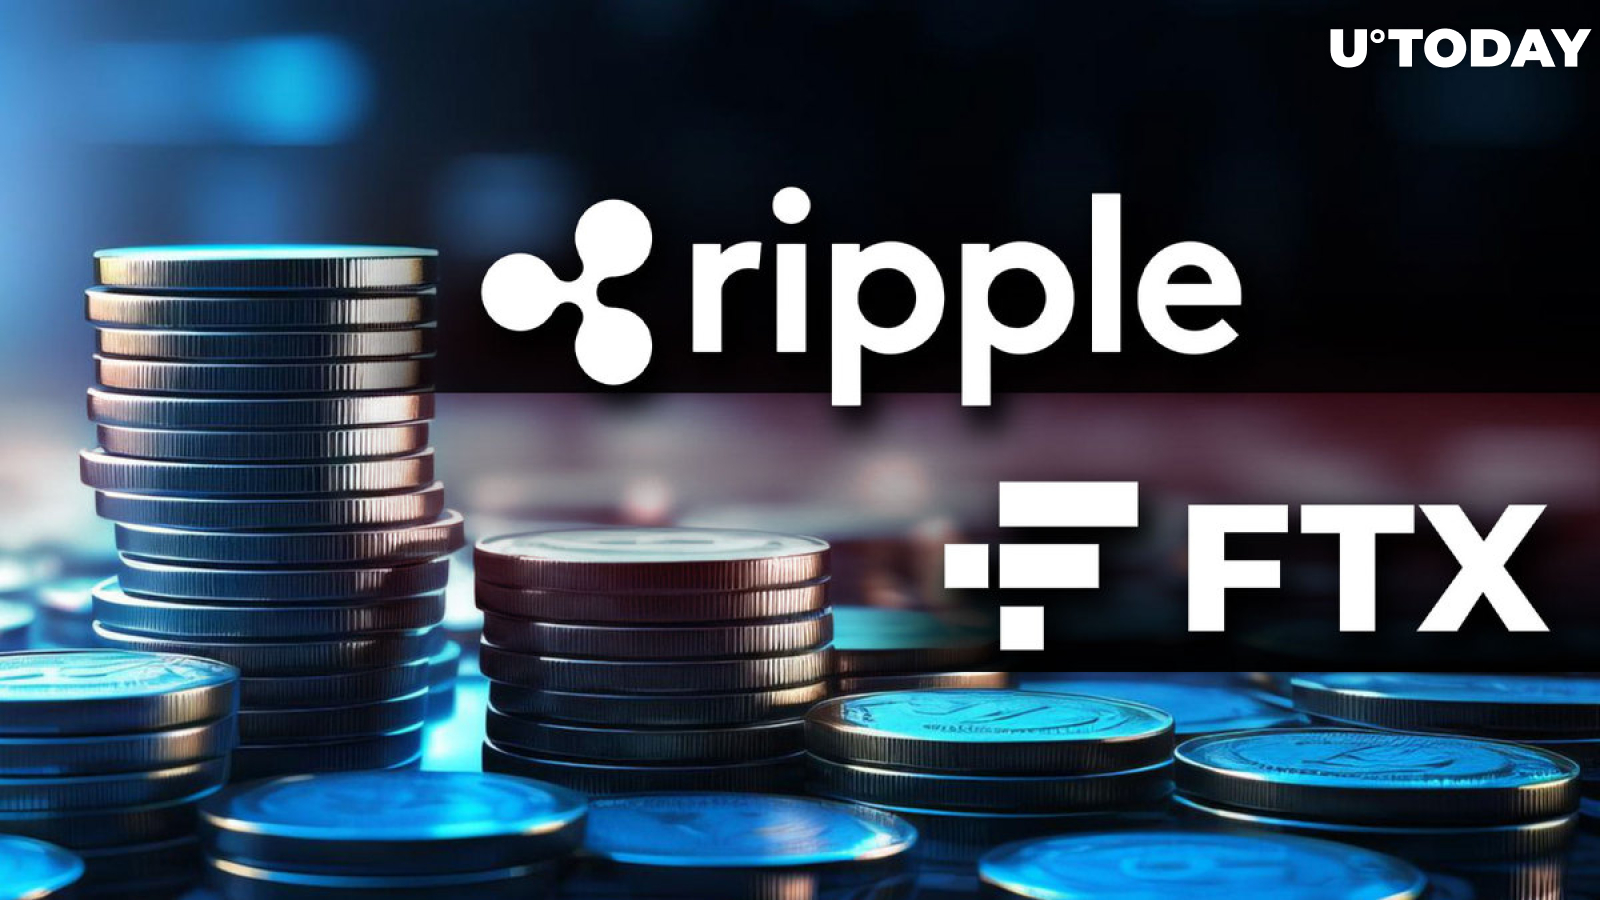 Ripple Has Claim on FTX Assets, Documents Say